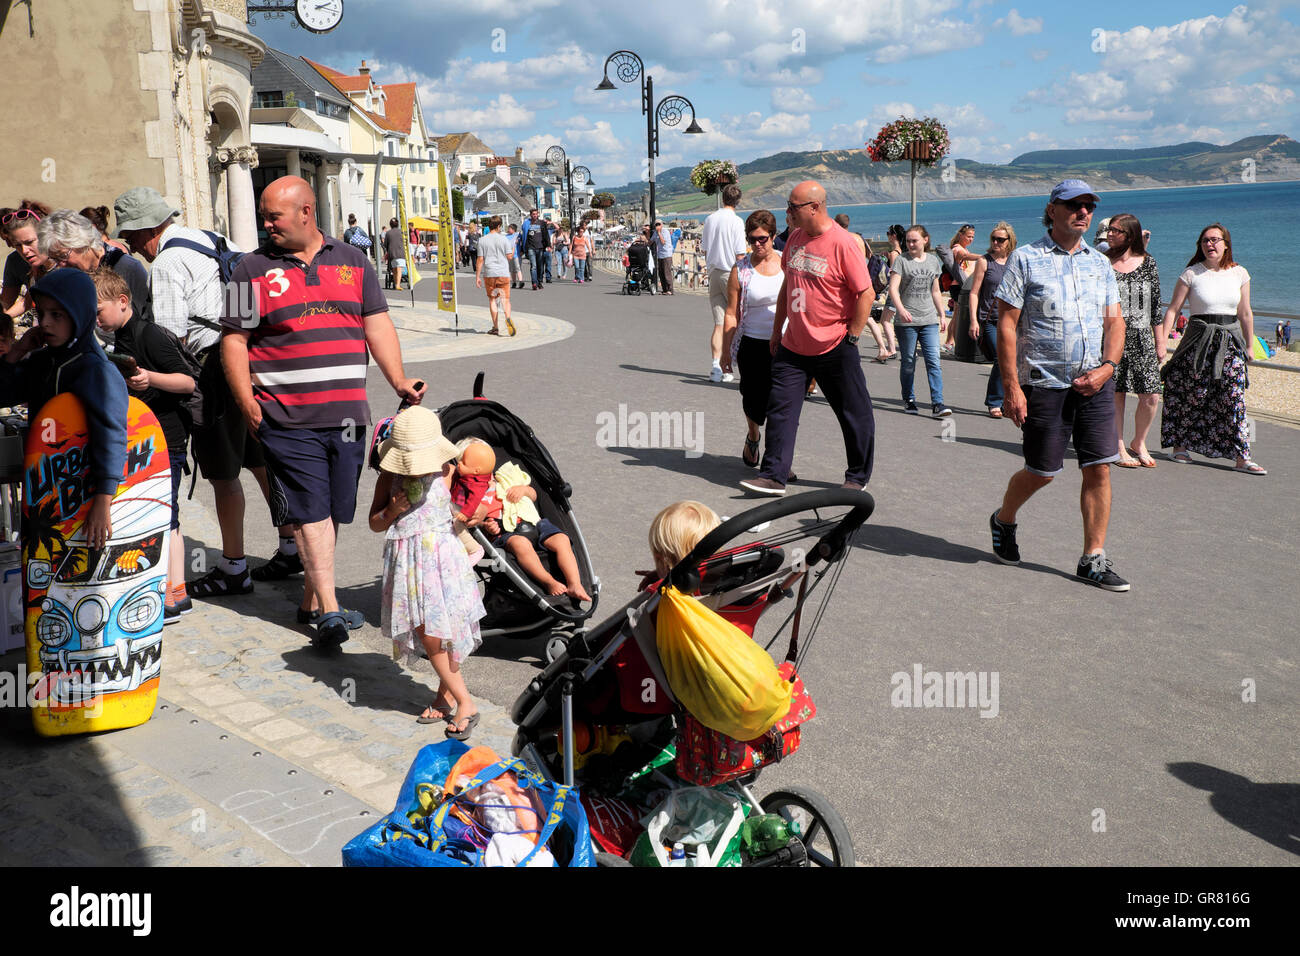 People on holiday look in shops on 'Marine Parade'  by the waterfront beach area at Lyme Regis, Dorset, England UK   KATHY DEWITT Stock Photo